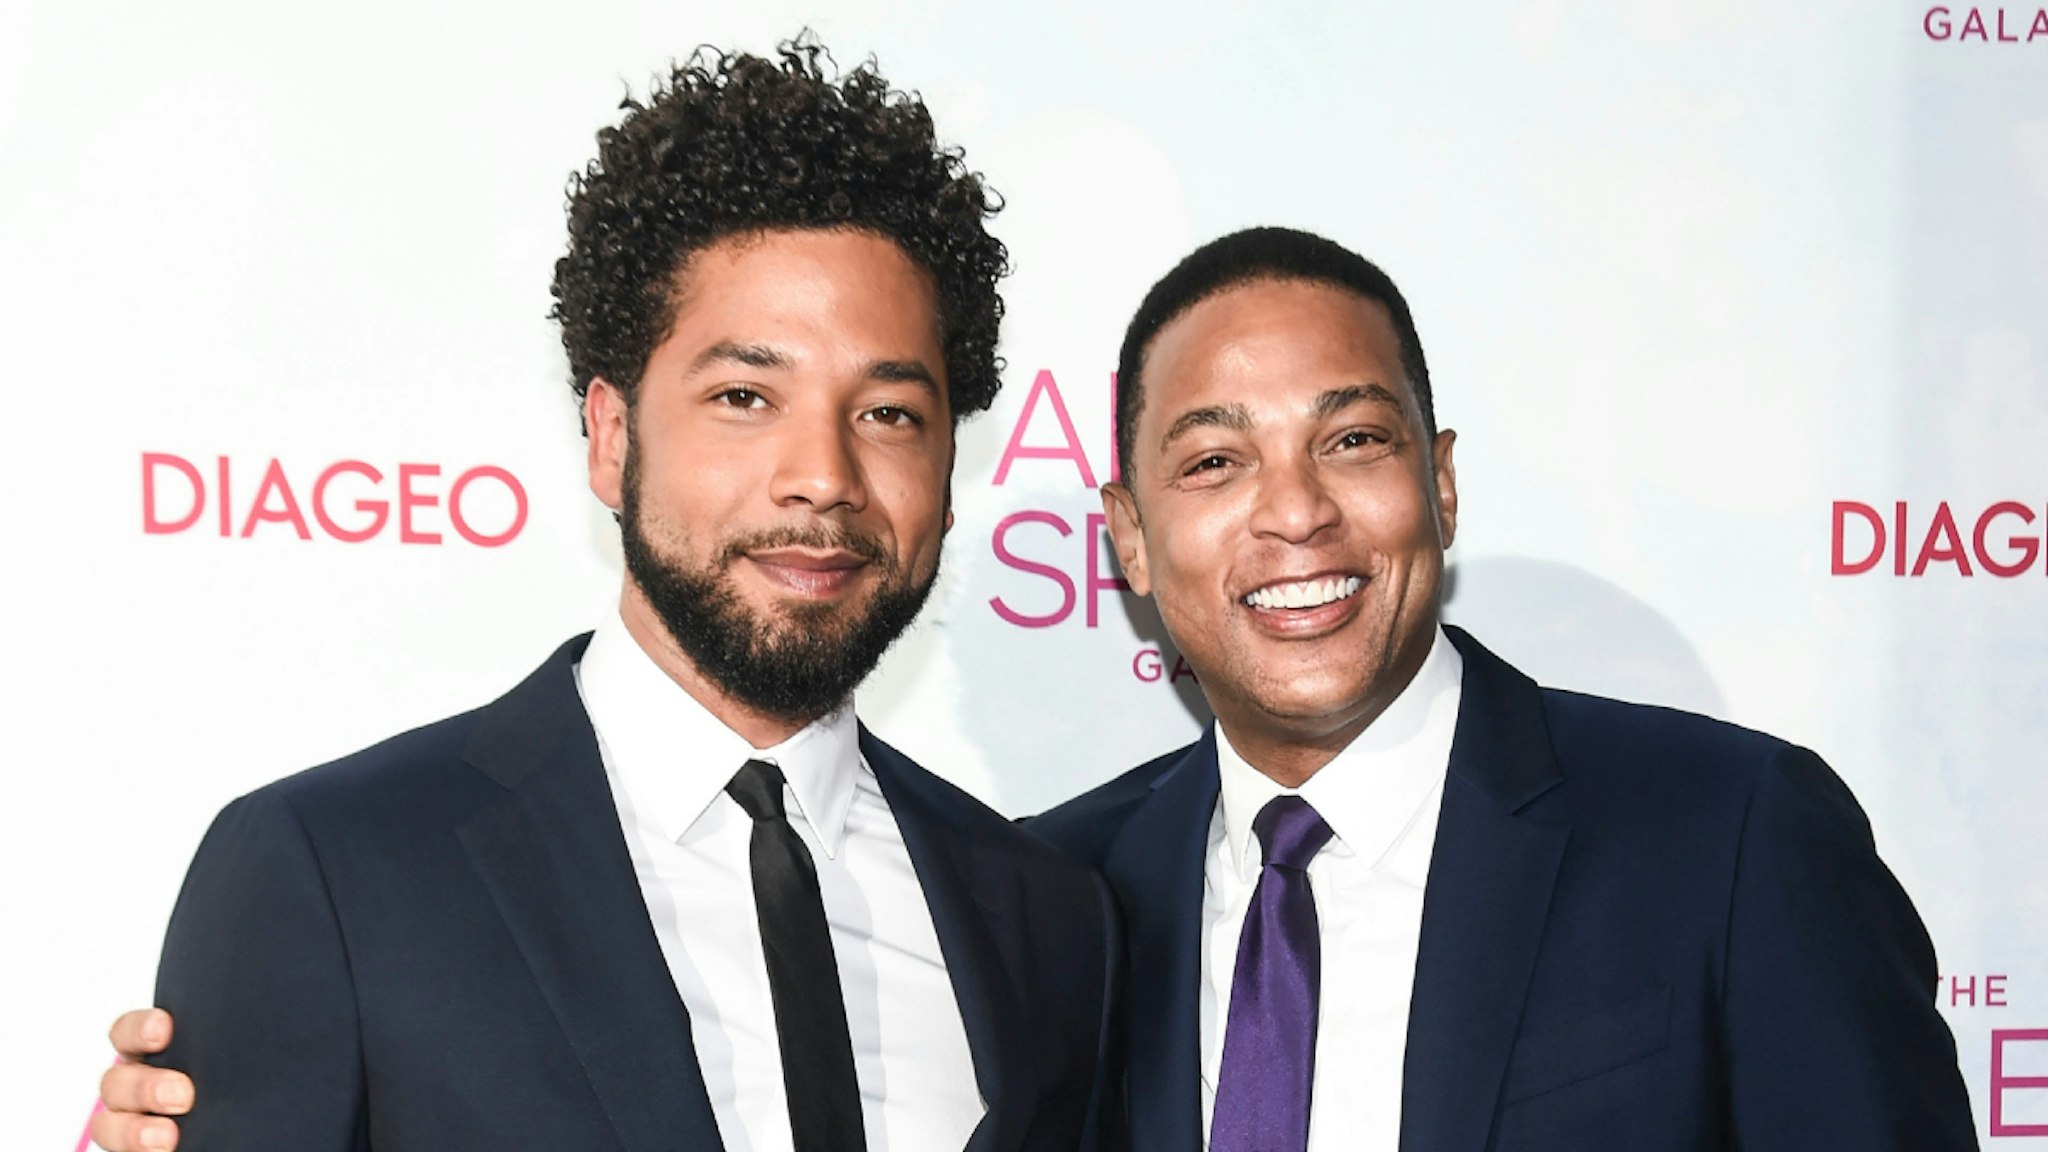 ussie Smollett and Don Lemon attend the 2018 Ailey Spirit Gala Benefit at David H. Koch Theater at Lincoln Center on June 14, 2018 in New York City.